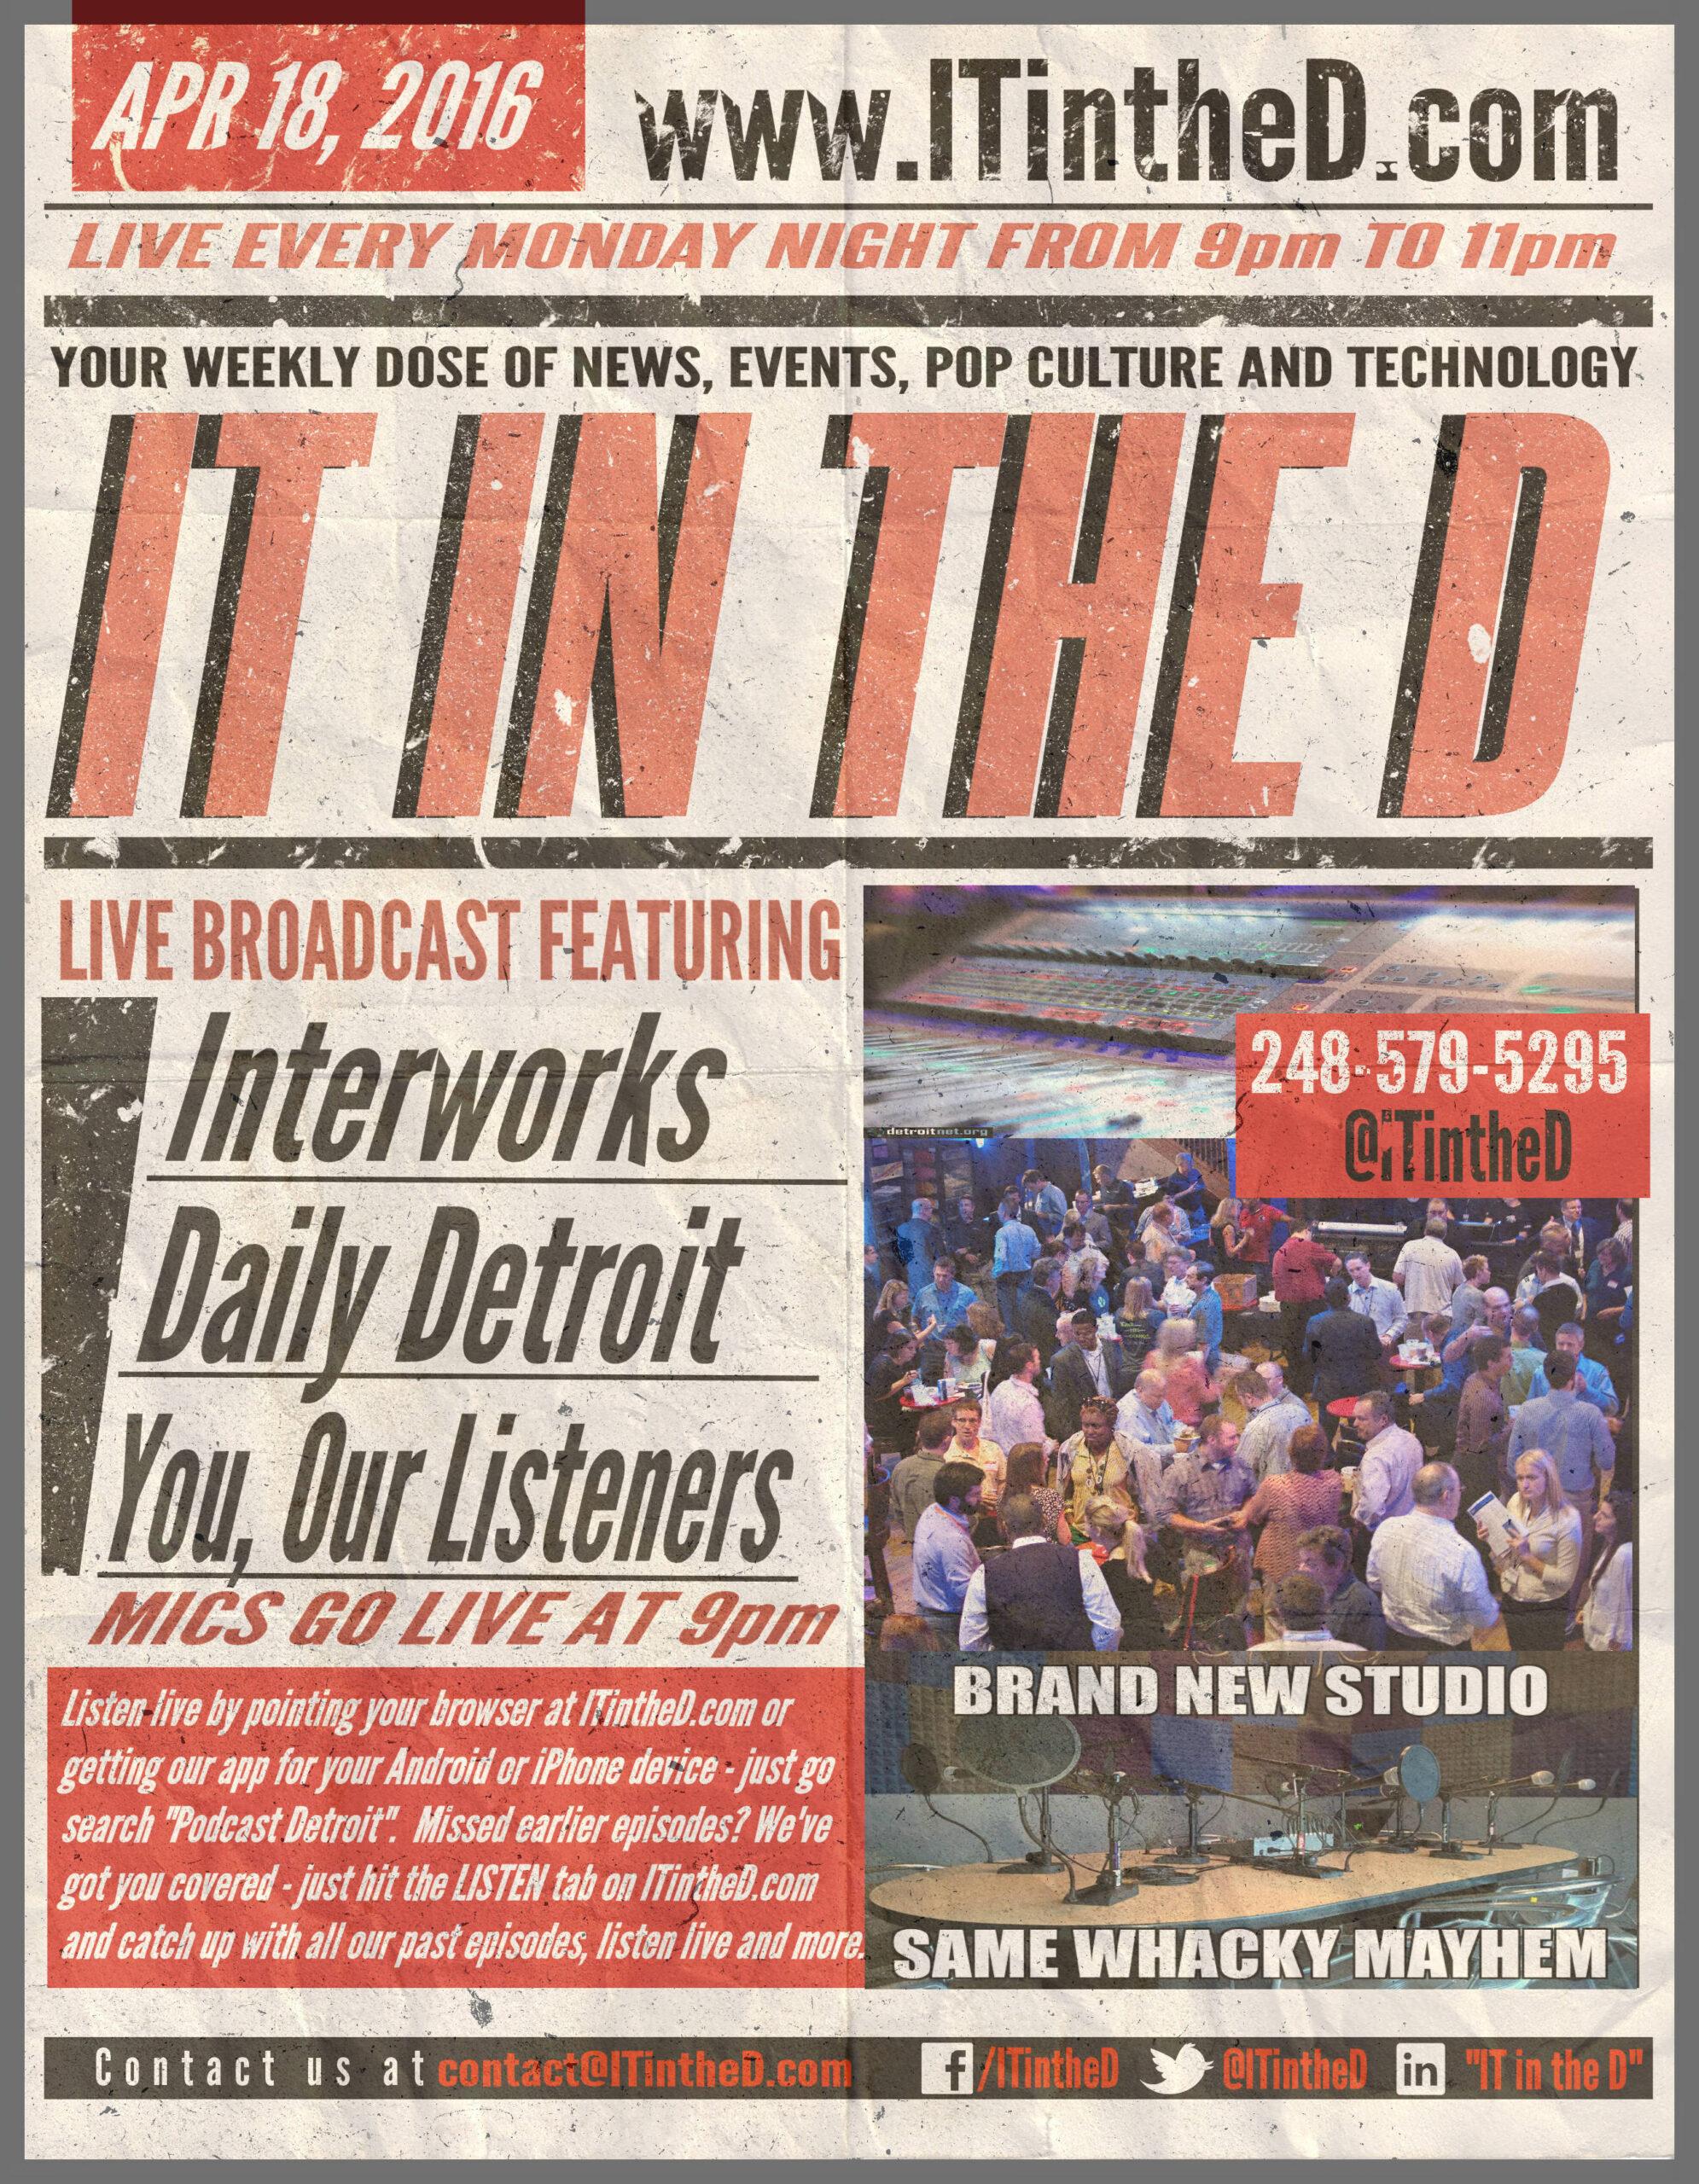 Interworks and Daily Detroit In Studio Tonight, Event Thursday Night and More for 4/18/2018